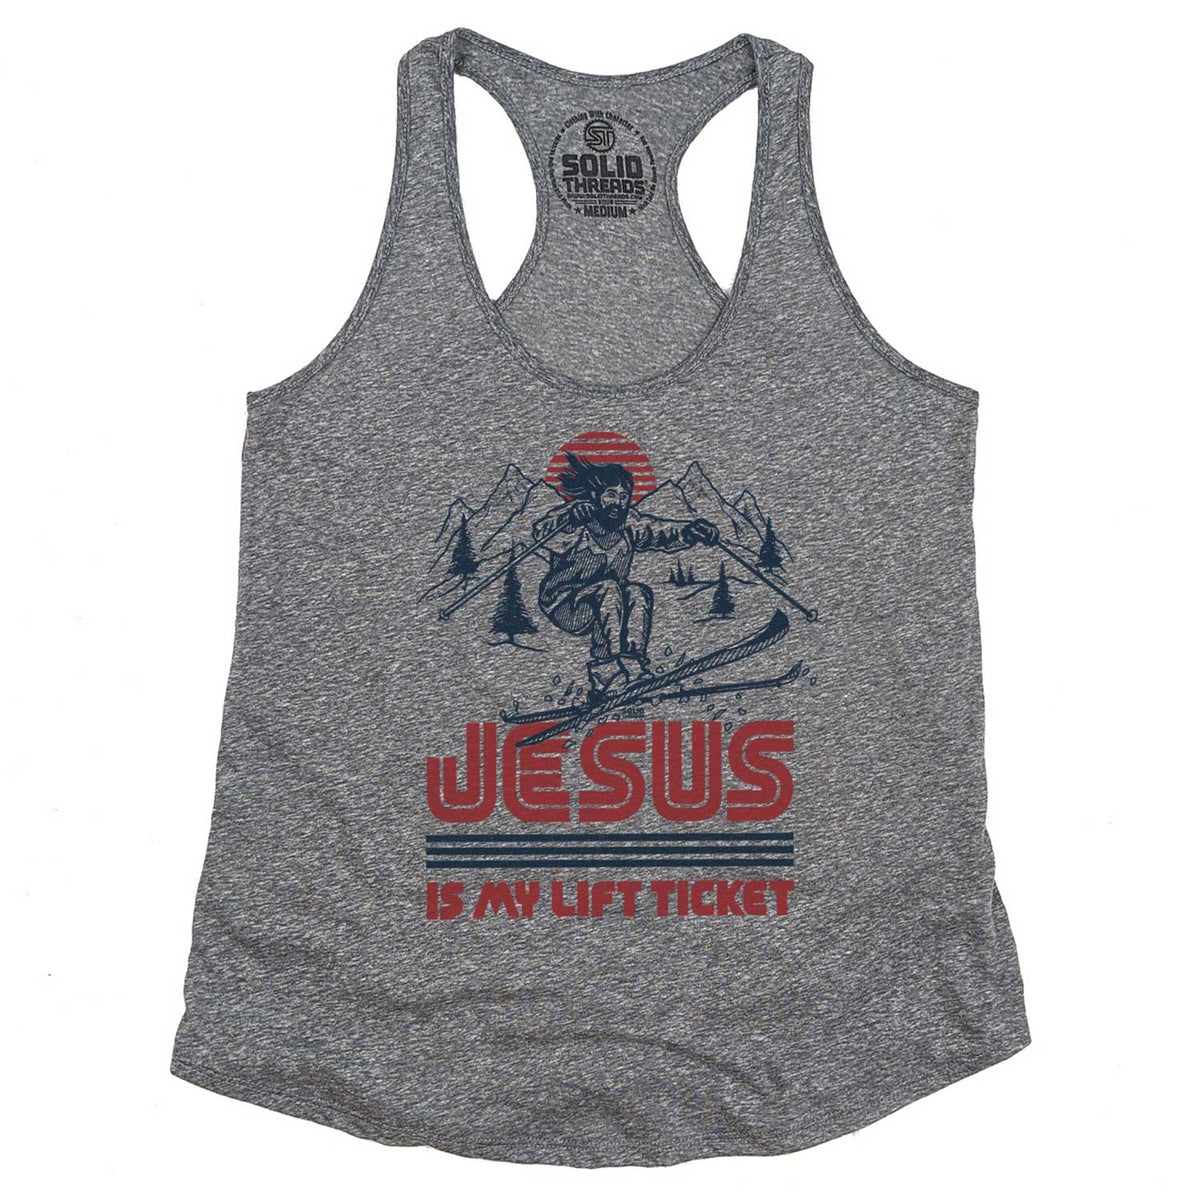 Women&#39;s Jesus is My Lift Ticket Vintage Graphic Tank Top | Funny Skiing T-shirt | Solid Threads